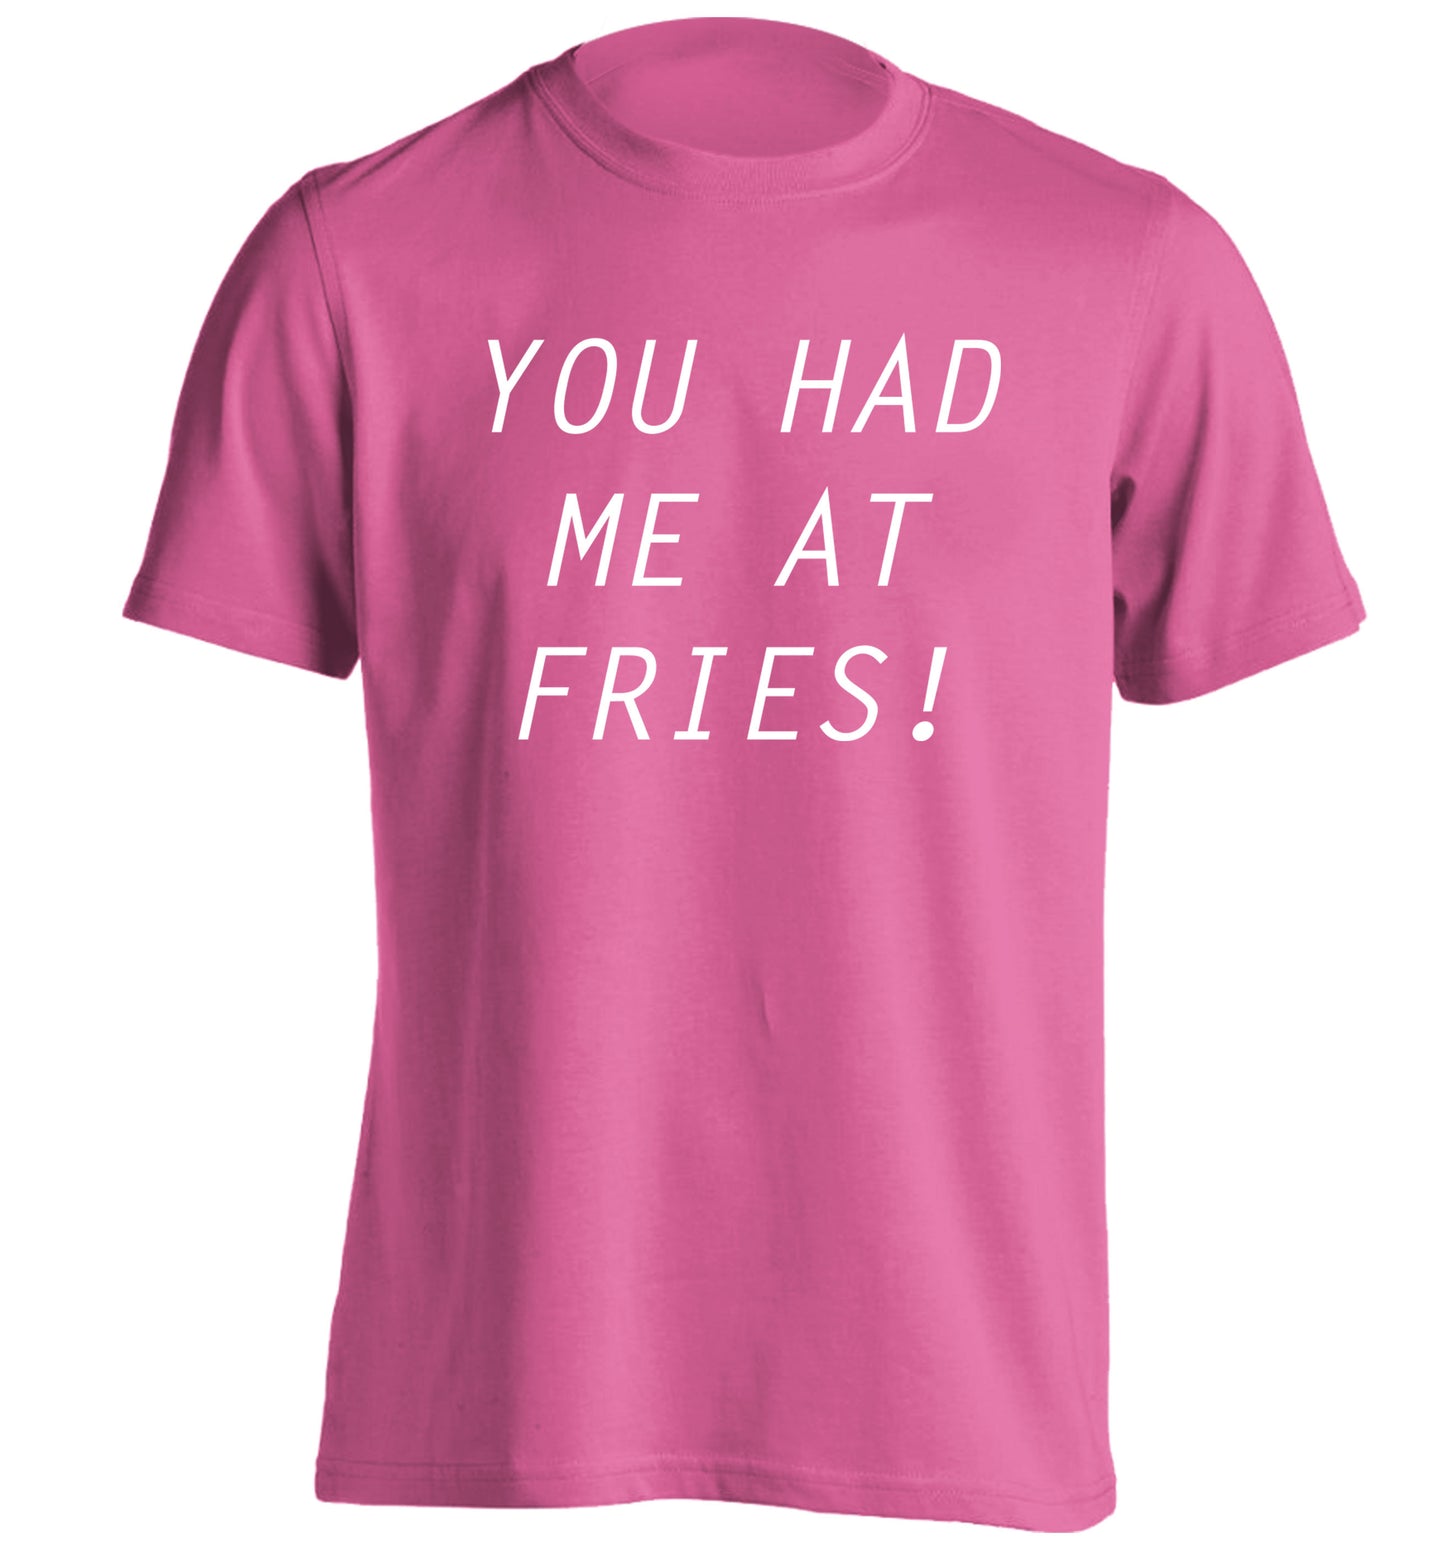 You had me at fries adults unisex pink Tshirt 2XL